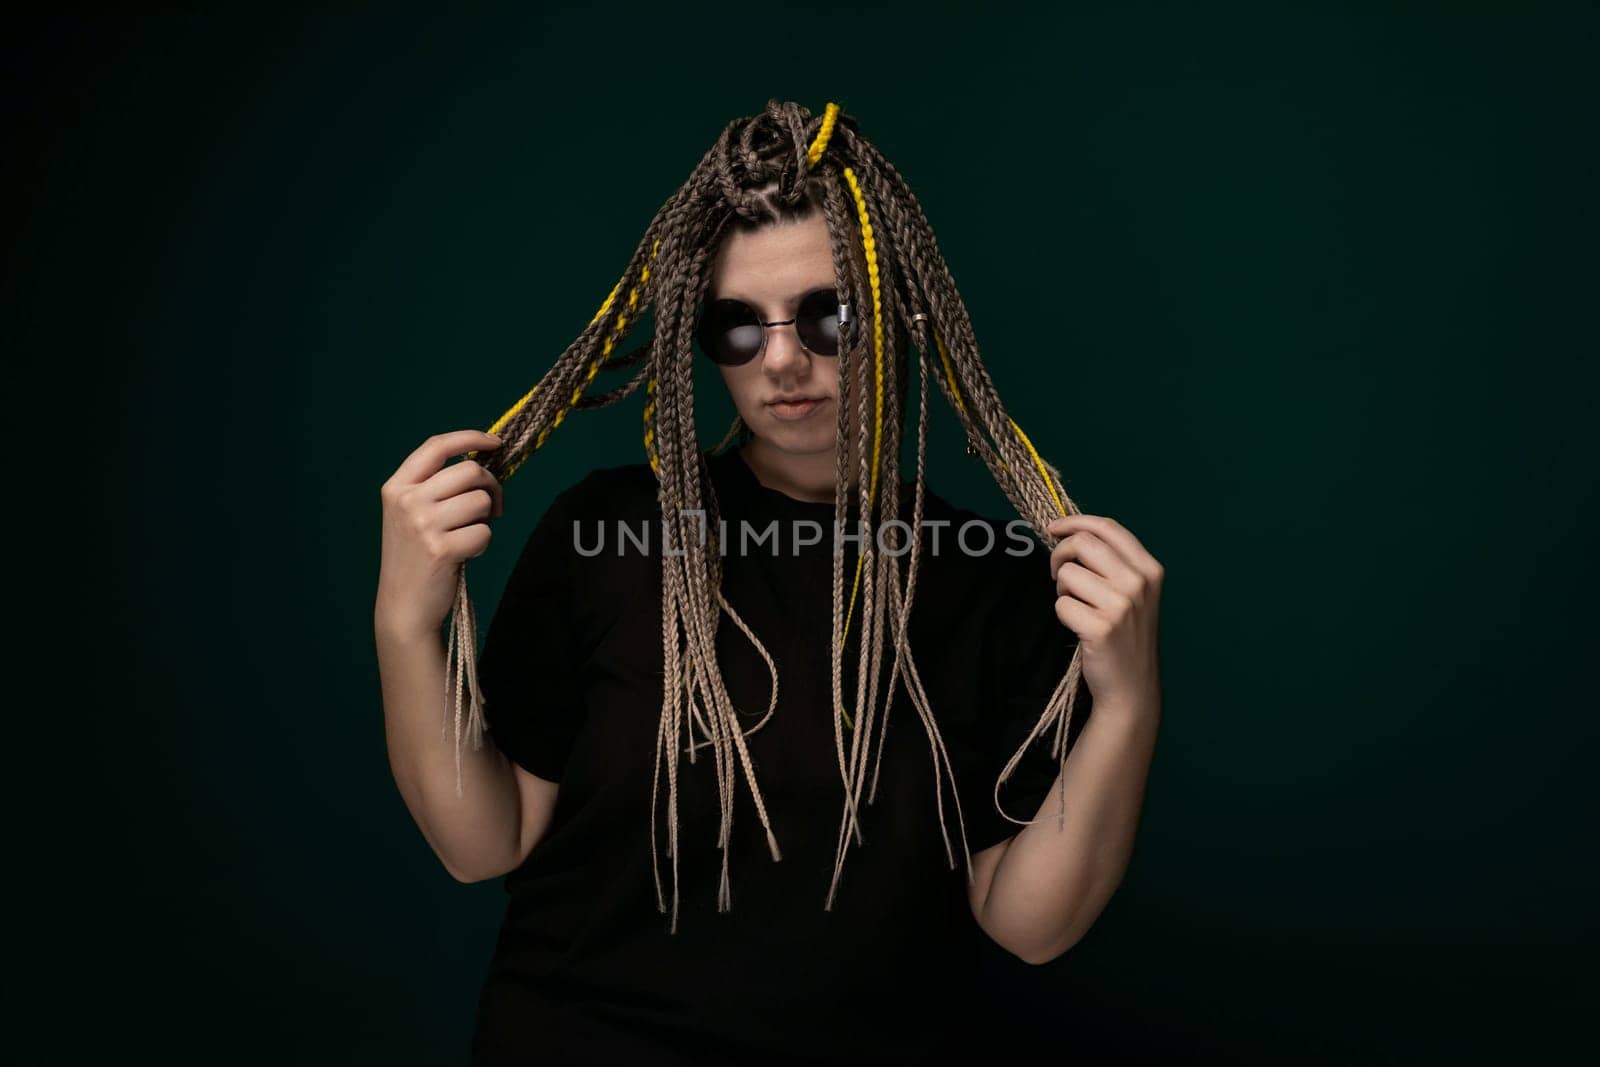 A man with dreadlocks is holding his long hair in front of his face, covering his features. His hair is styled in thick, twisted strands that reach down to his chest. The mans face is partially obscured by the curtain of hair, creating a mysterious and introspective atmosphere.